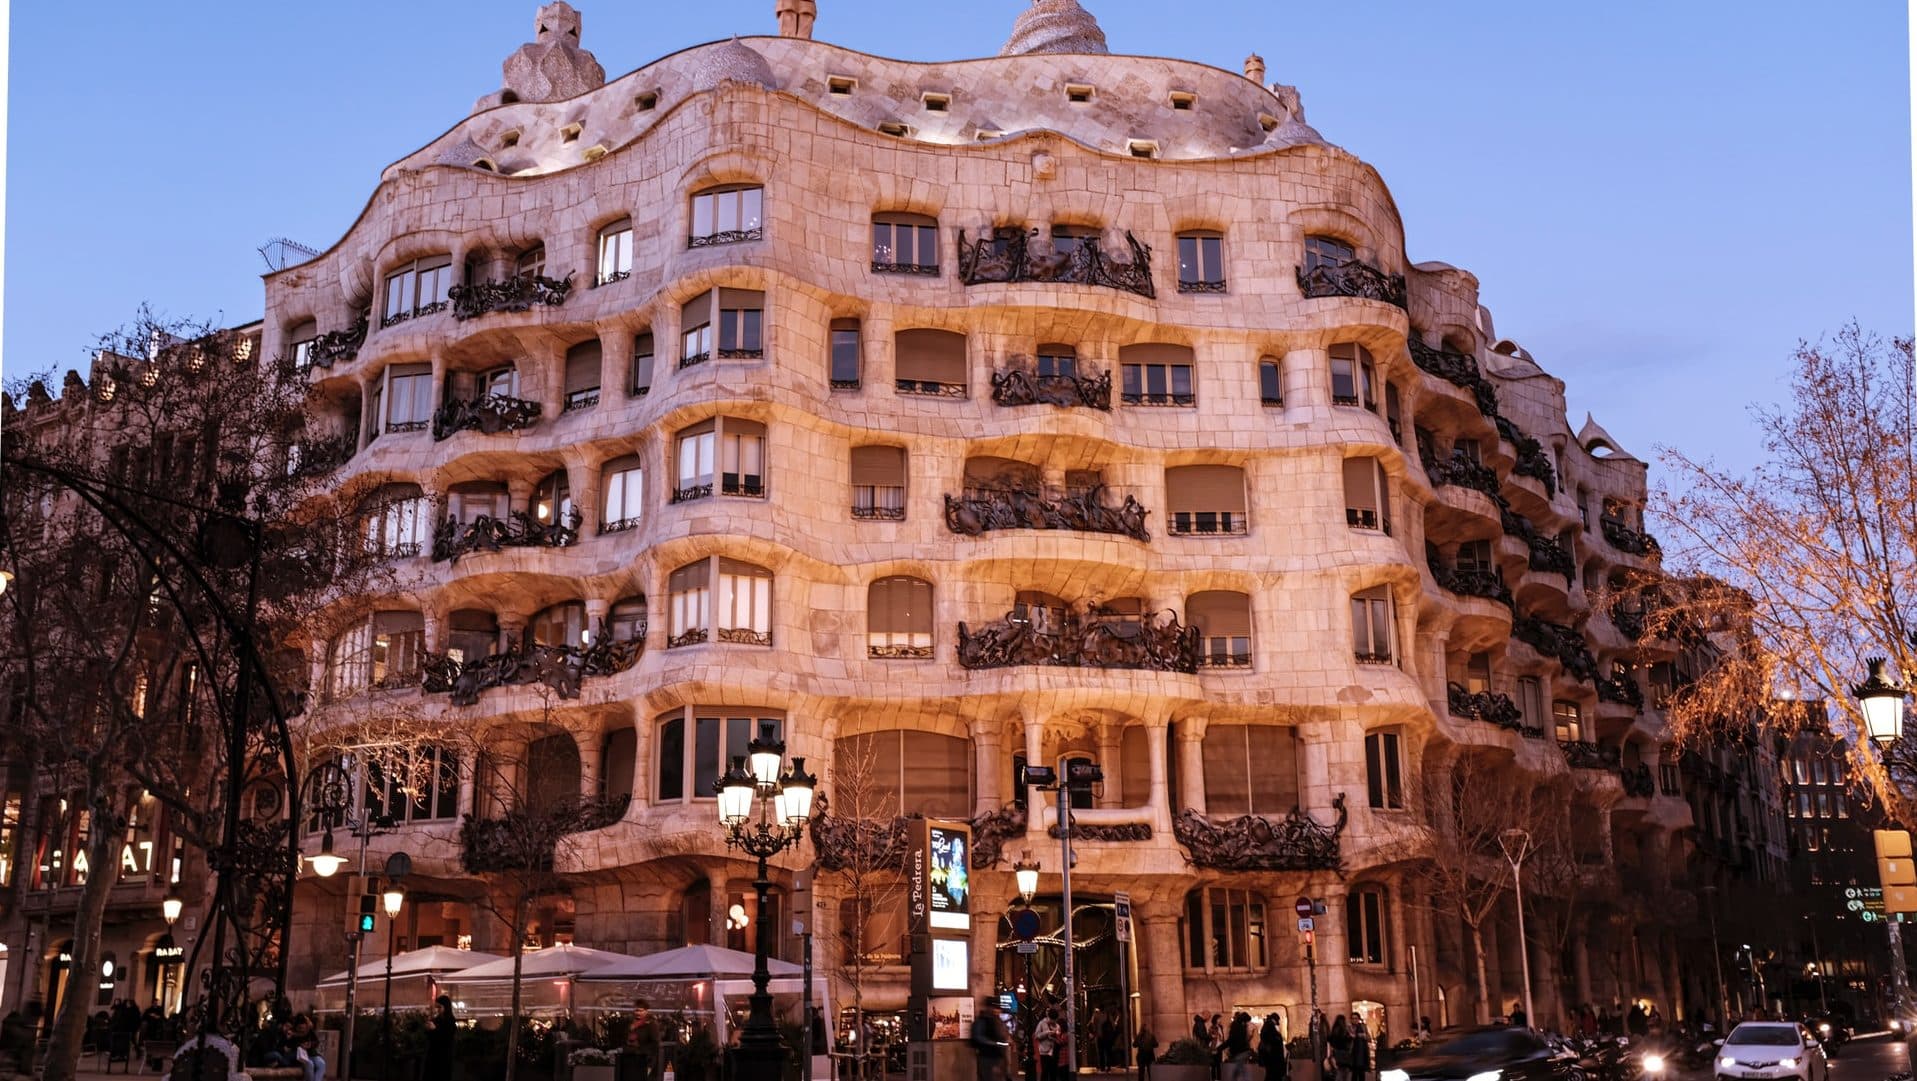 La Pedrera is one of the architectural masterpieces of Barcelona